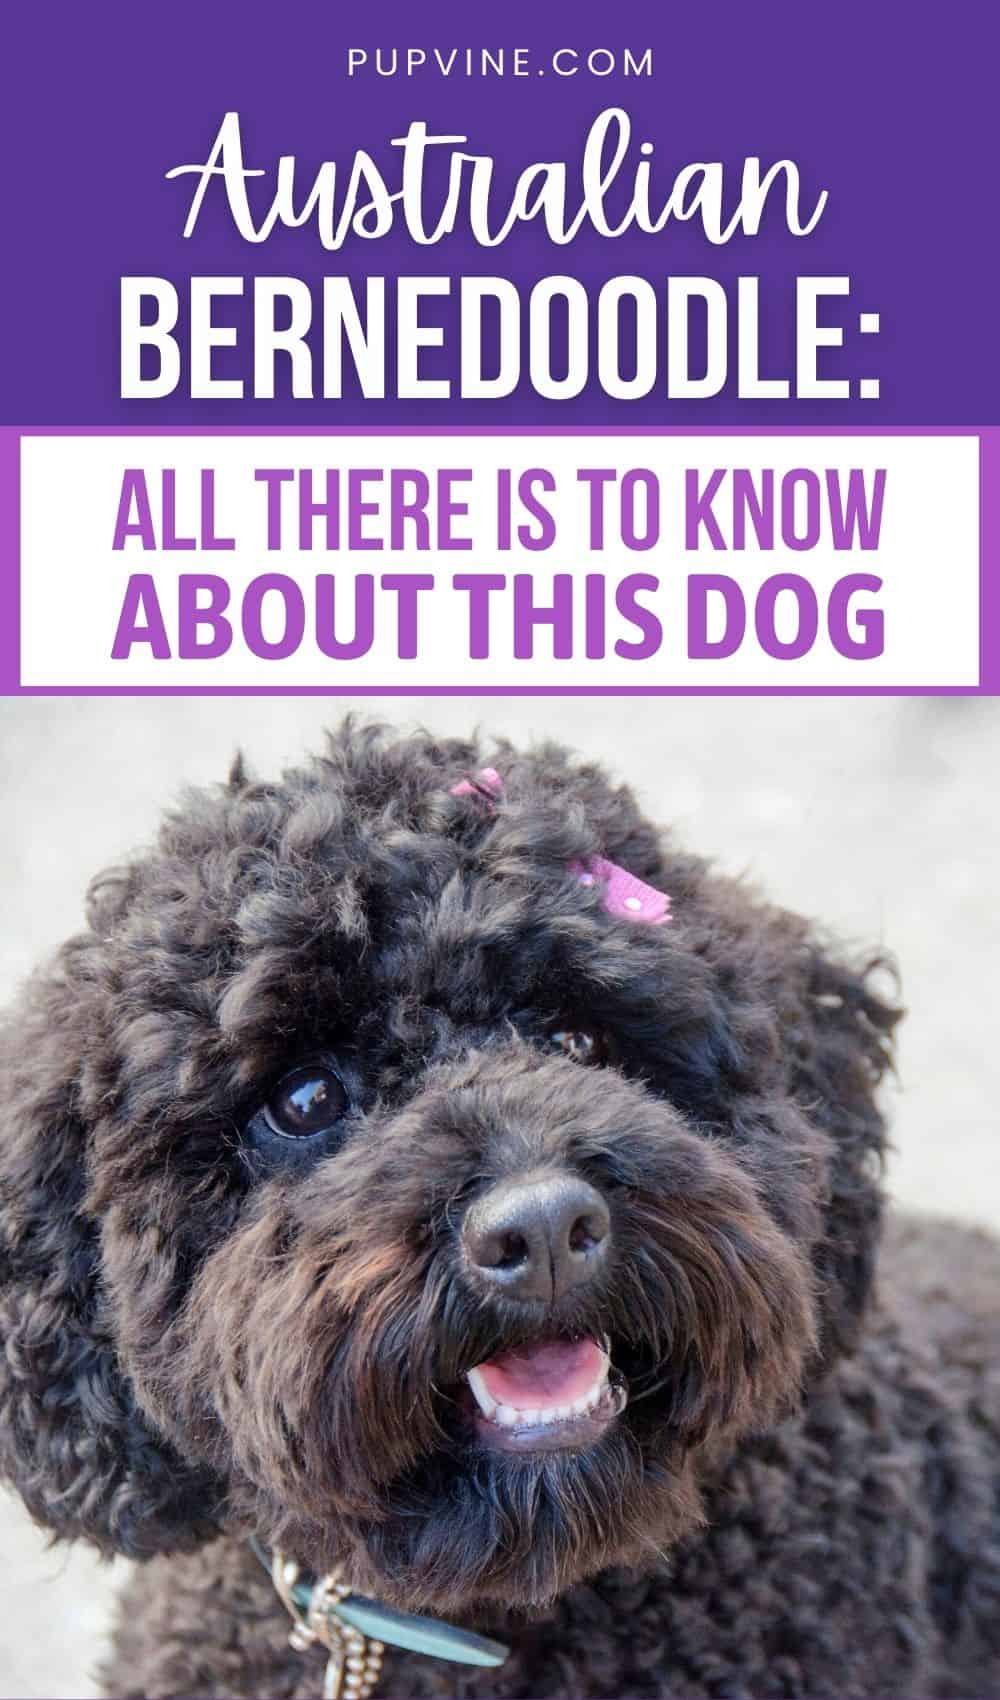 Australian Bernedoodle All There Is To Know About This Dog